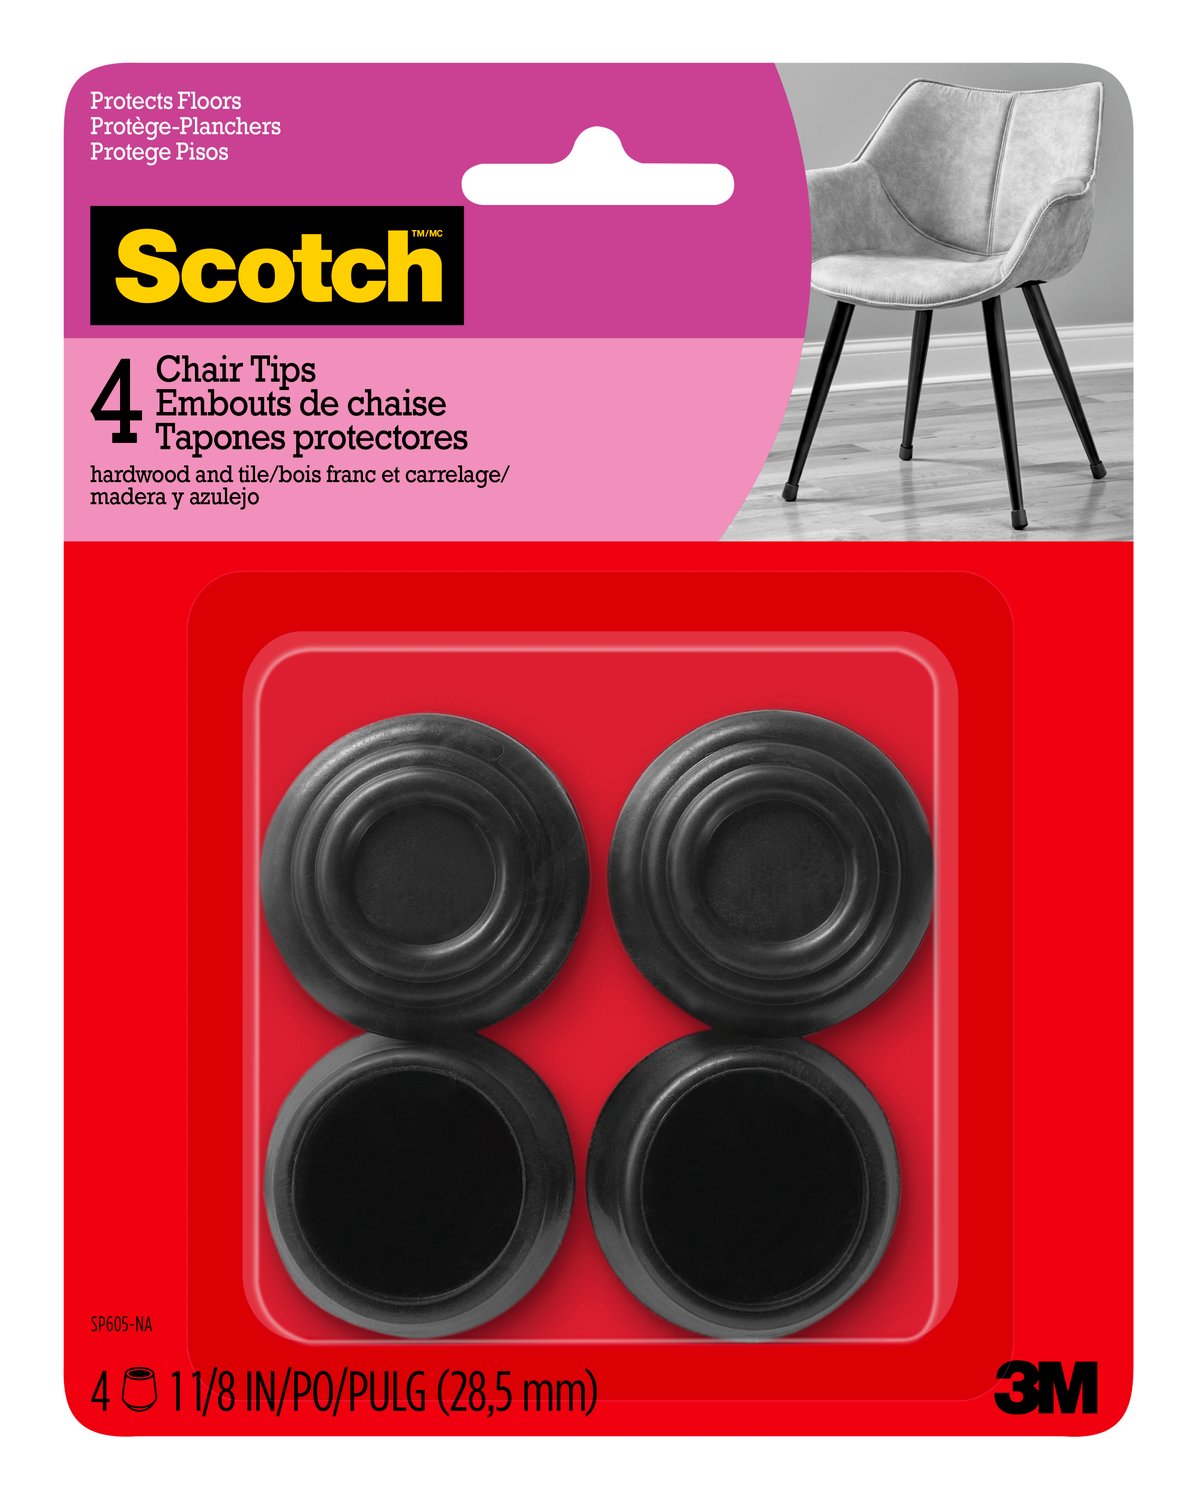 7100185137 - Scotch Chair Tips SP605-NA, Black Rubber 1-1/8-in 4/pk